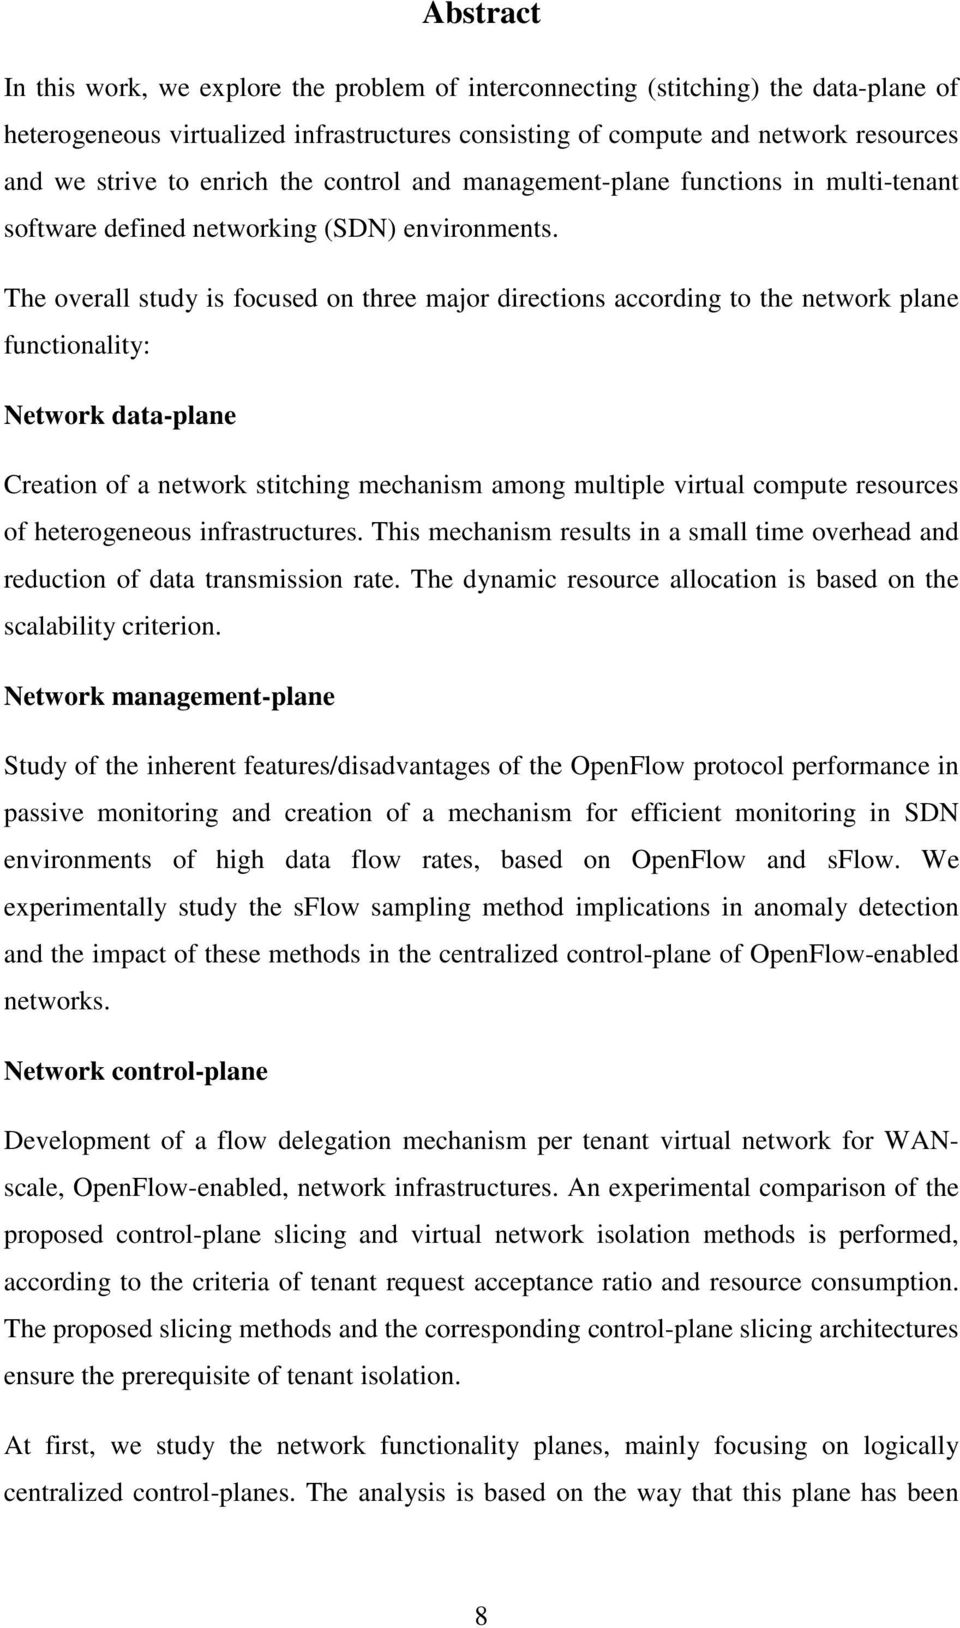 The overall study is focused on three major directions according to the network plane functionality: Network data-plane Creation of a network stitching mechanism among multiple virtual compute